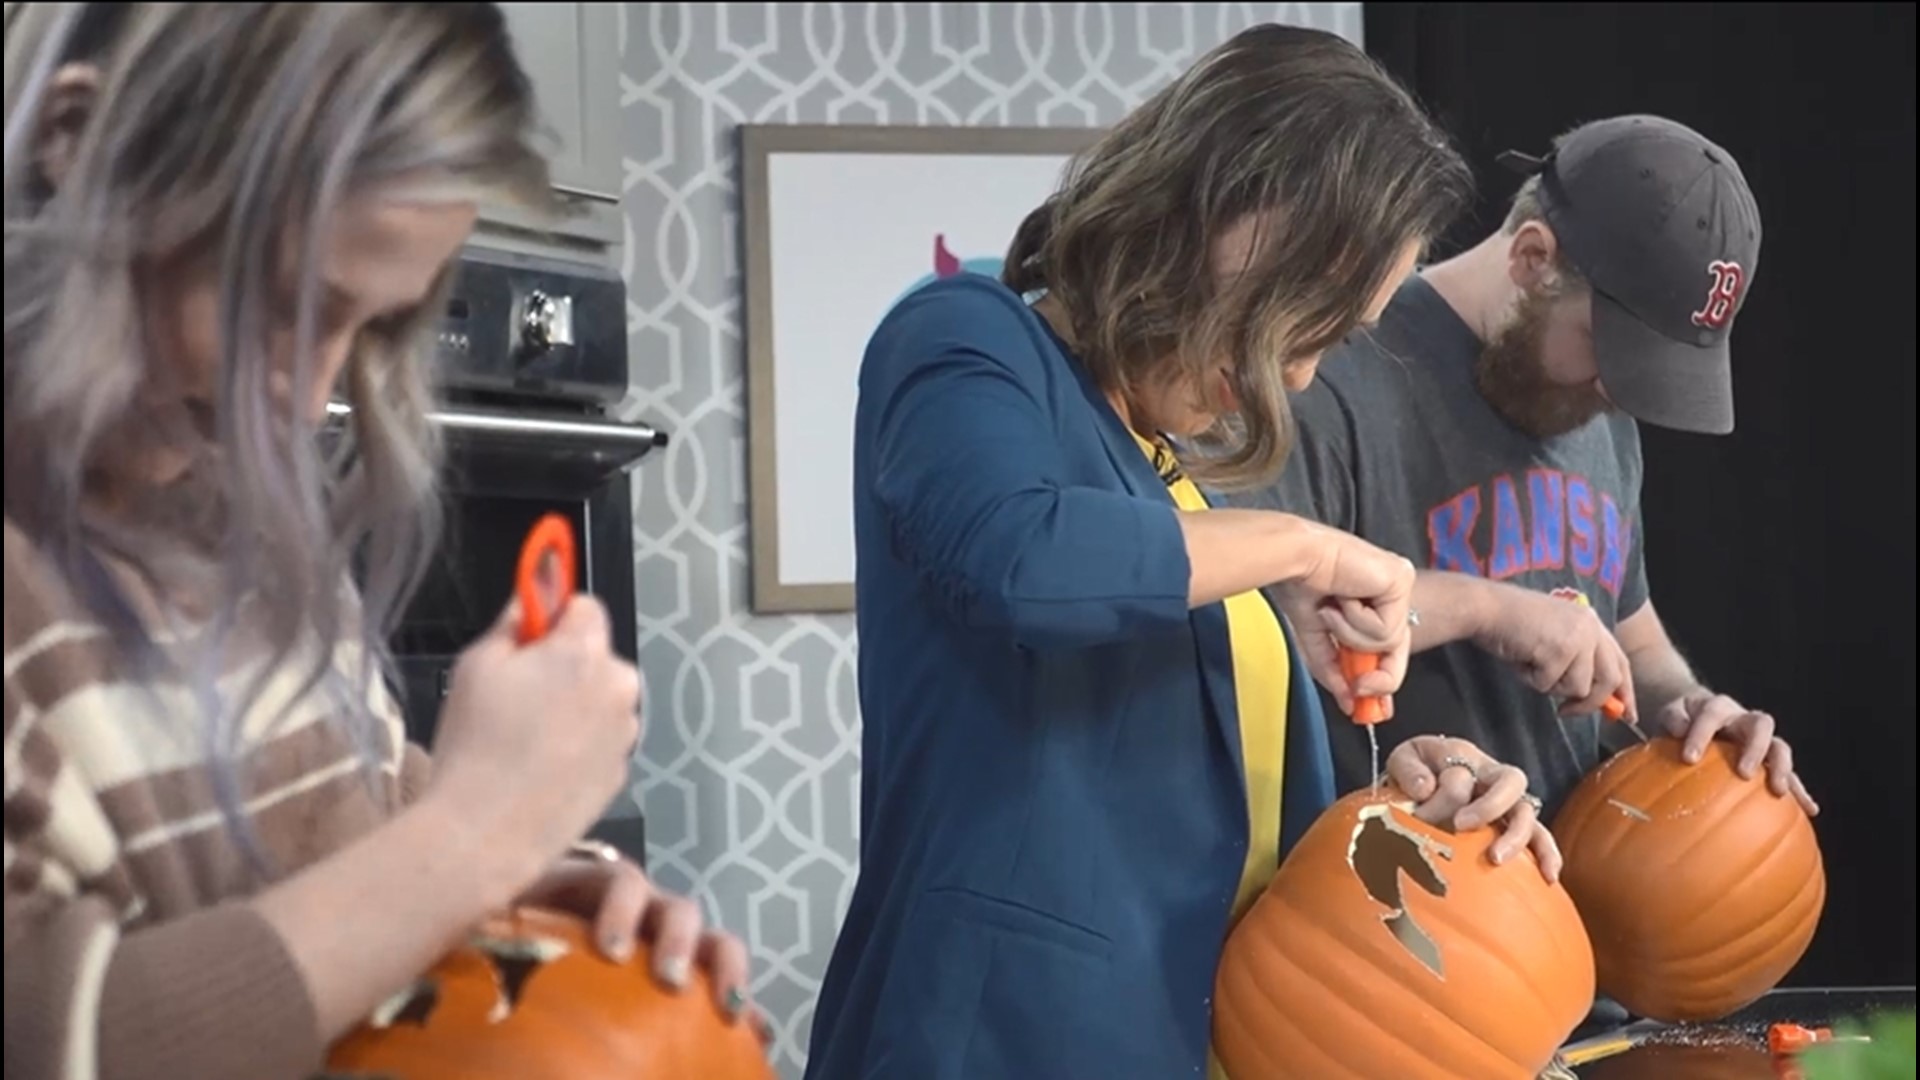 Check out the first annual Pumpkin Carving Contest with the Idaho Today team!